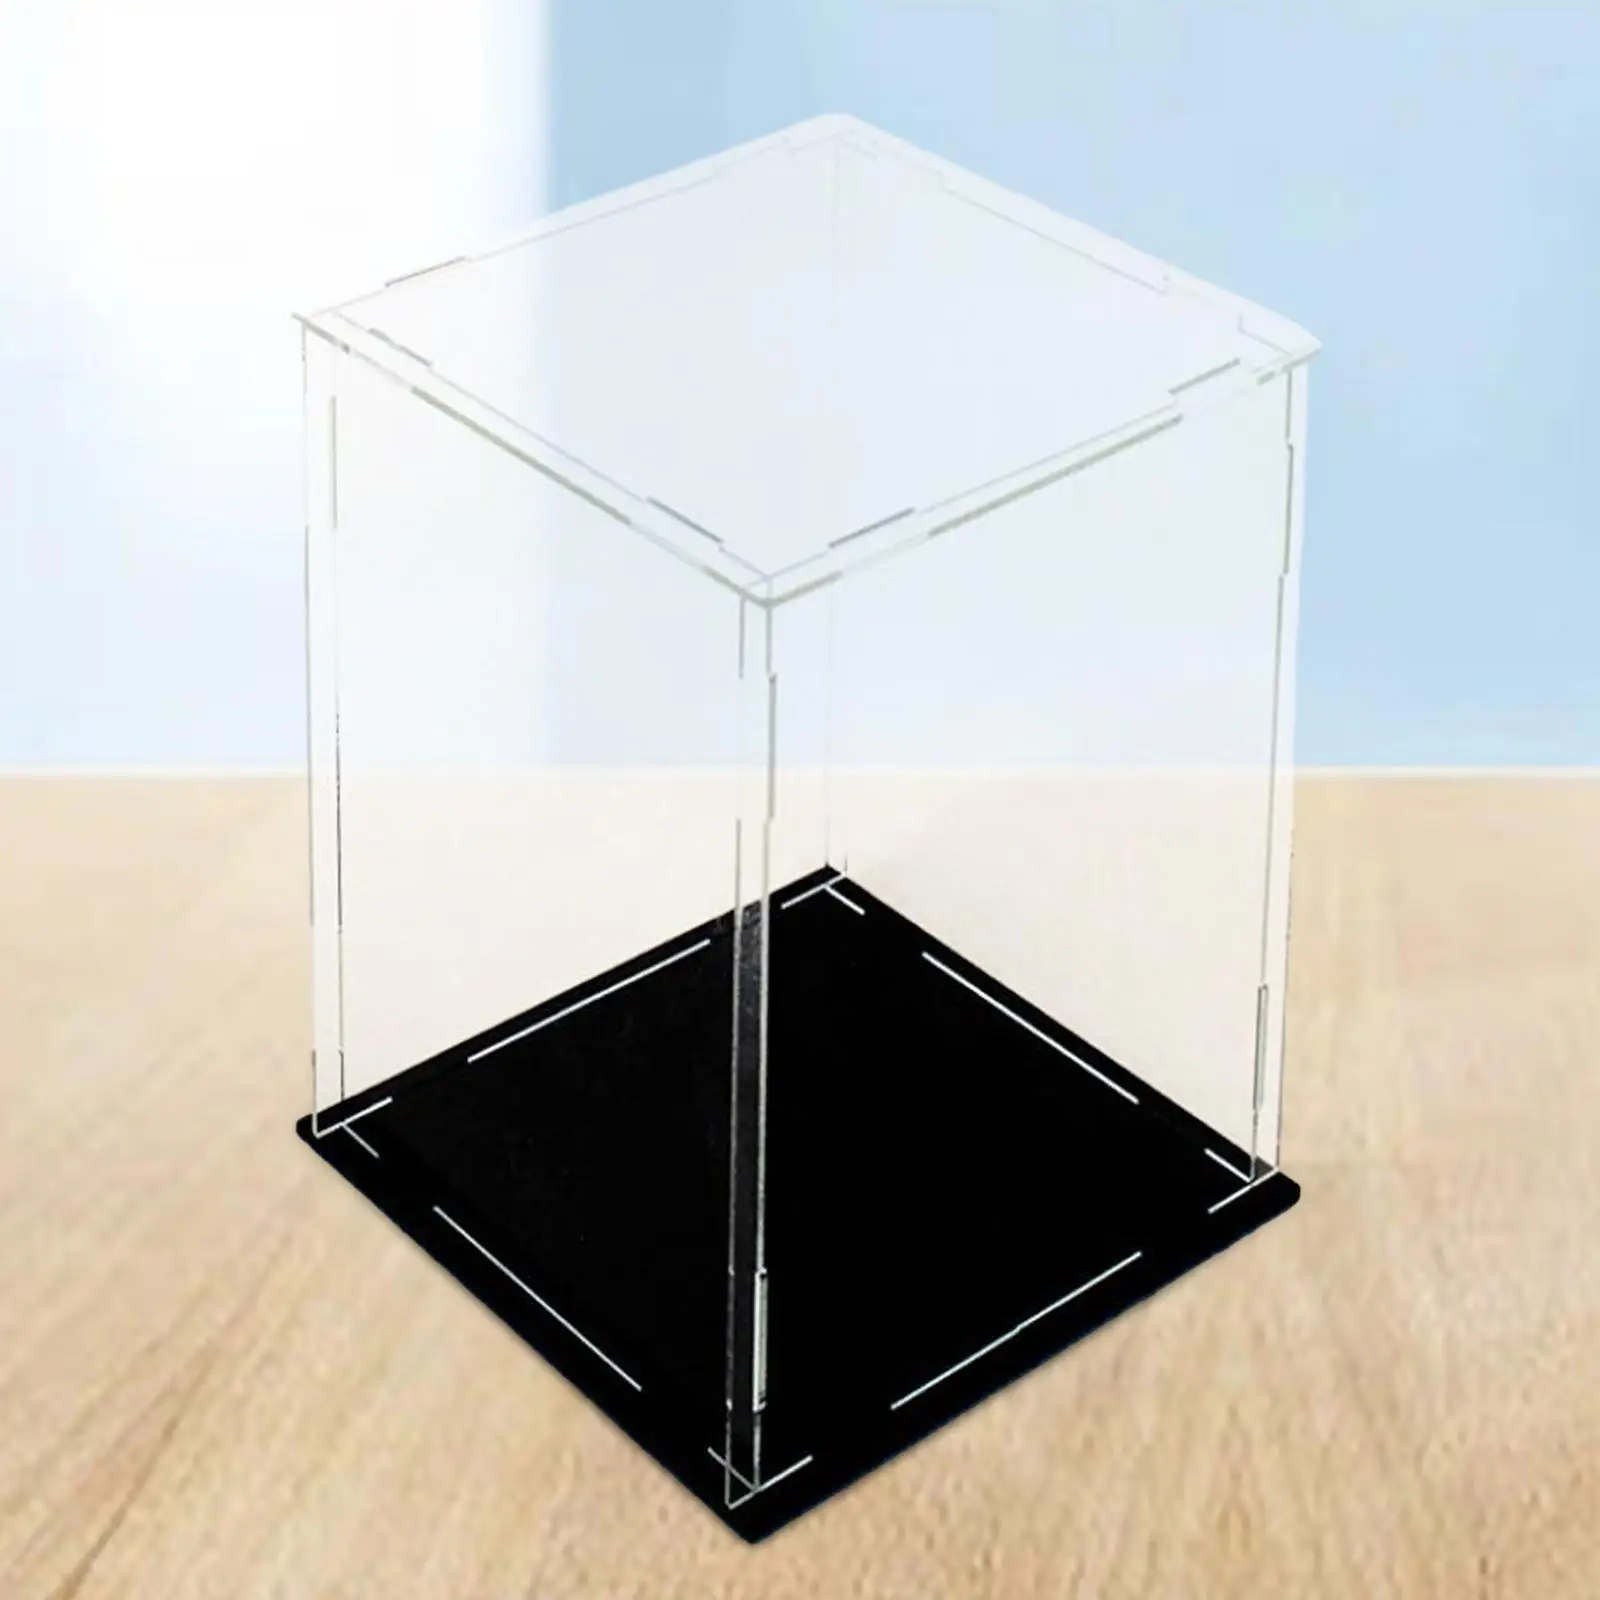 Acrylic Display Case Showcase for Action Figures Stackable Collection Acrylic Cube for Model Cars Statue Miniature Figurines